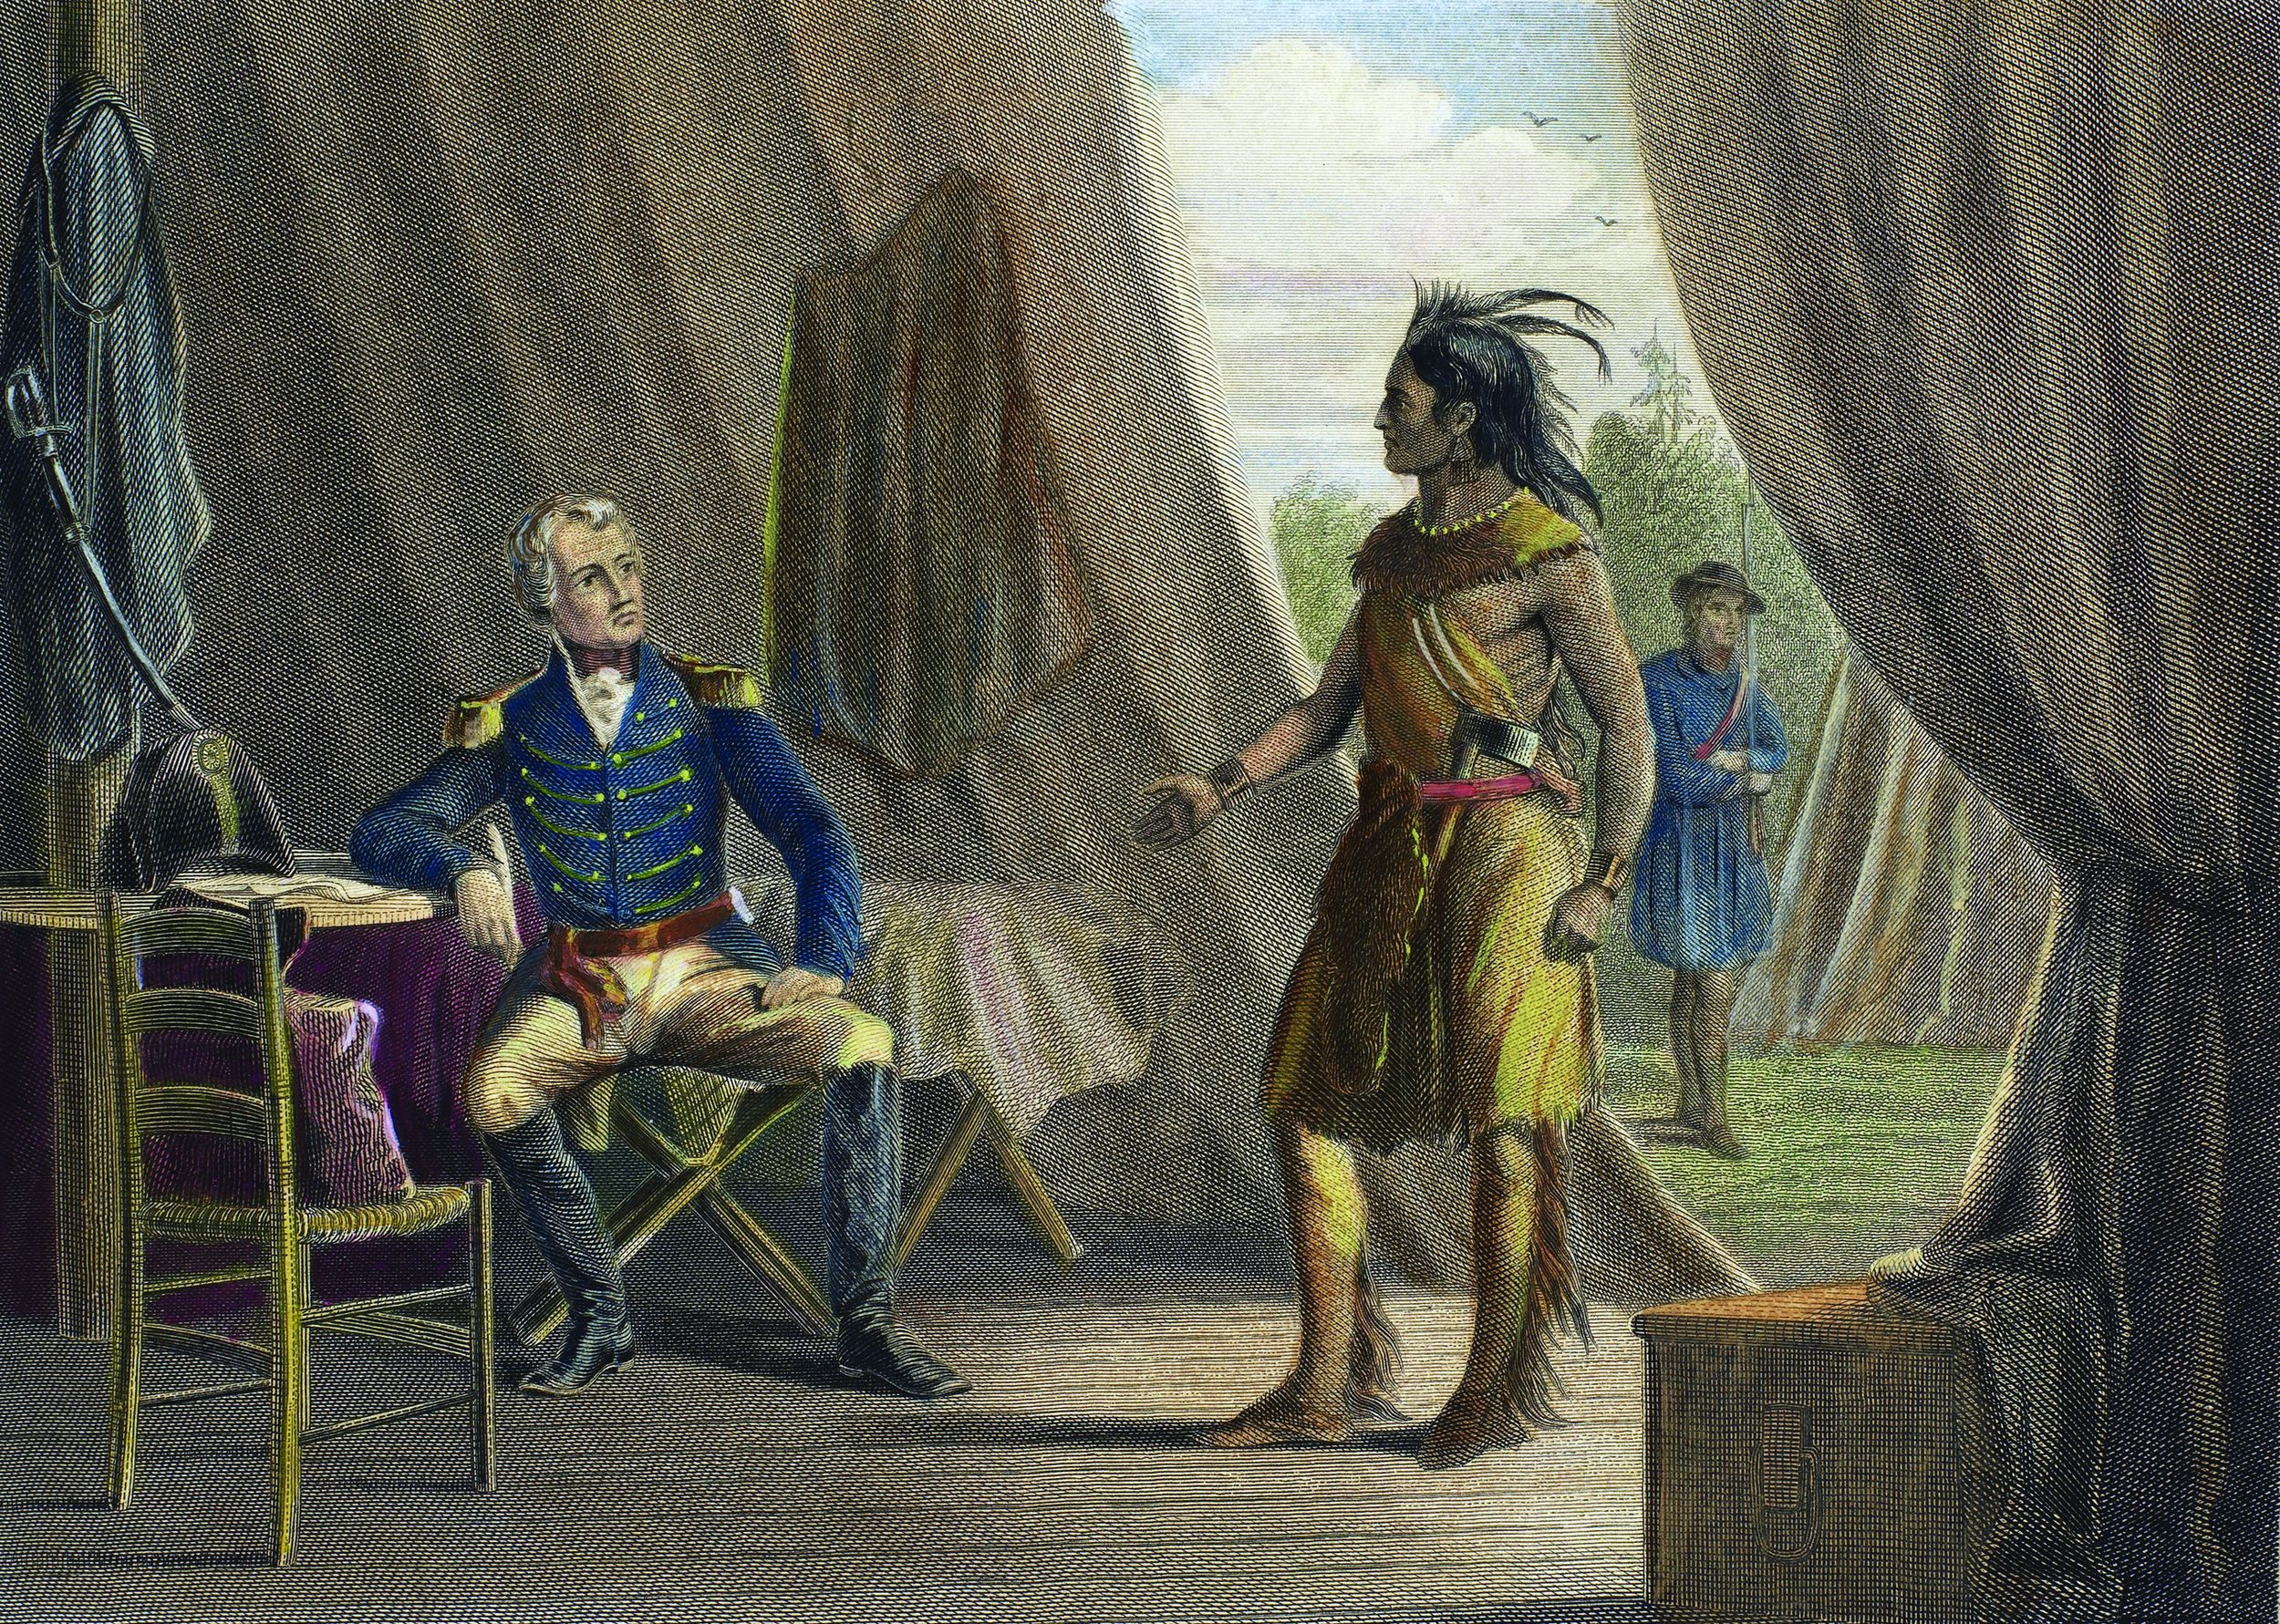 General Jackson accepts the surrender of William Weatherford, Chief Red Eagle, after the Creek defeat at Horseshoe Bend. 